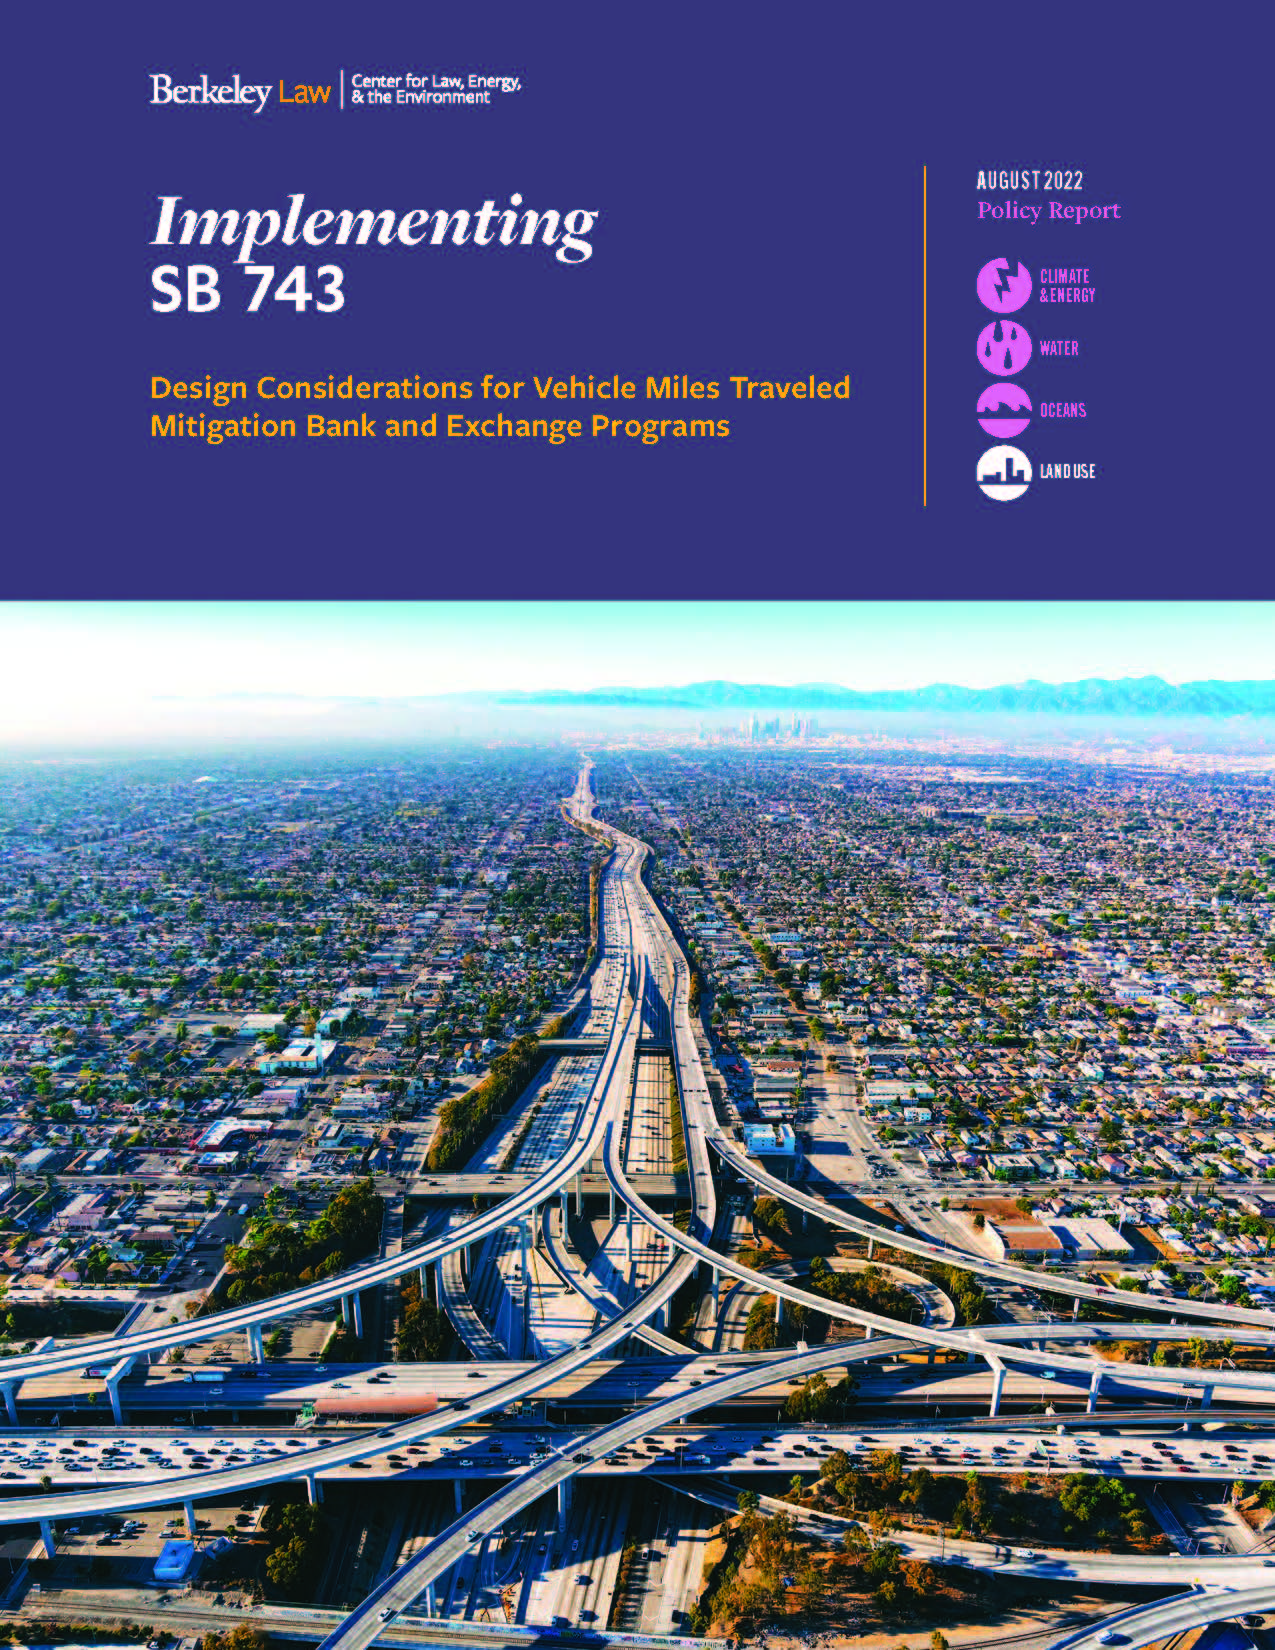 Report cover. Title Implementing SB 743 and image of freeways in urban landscape.